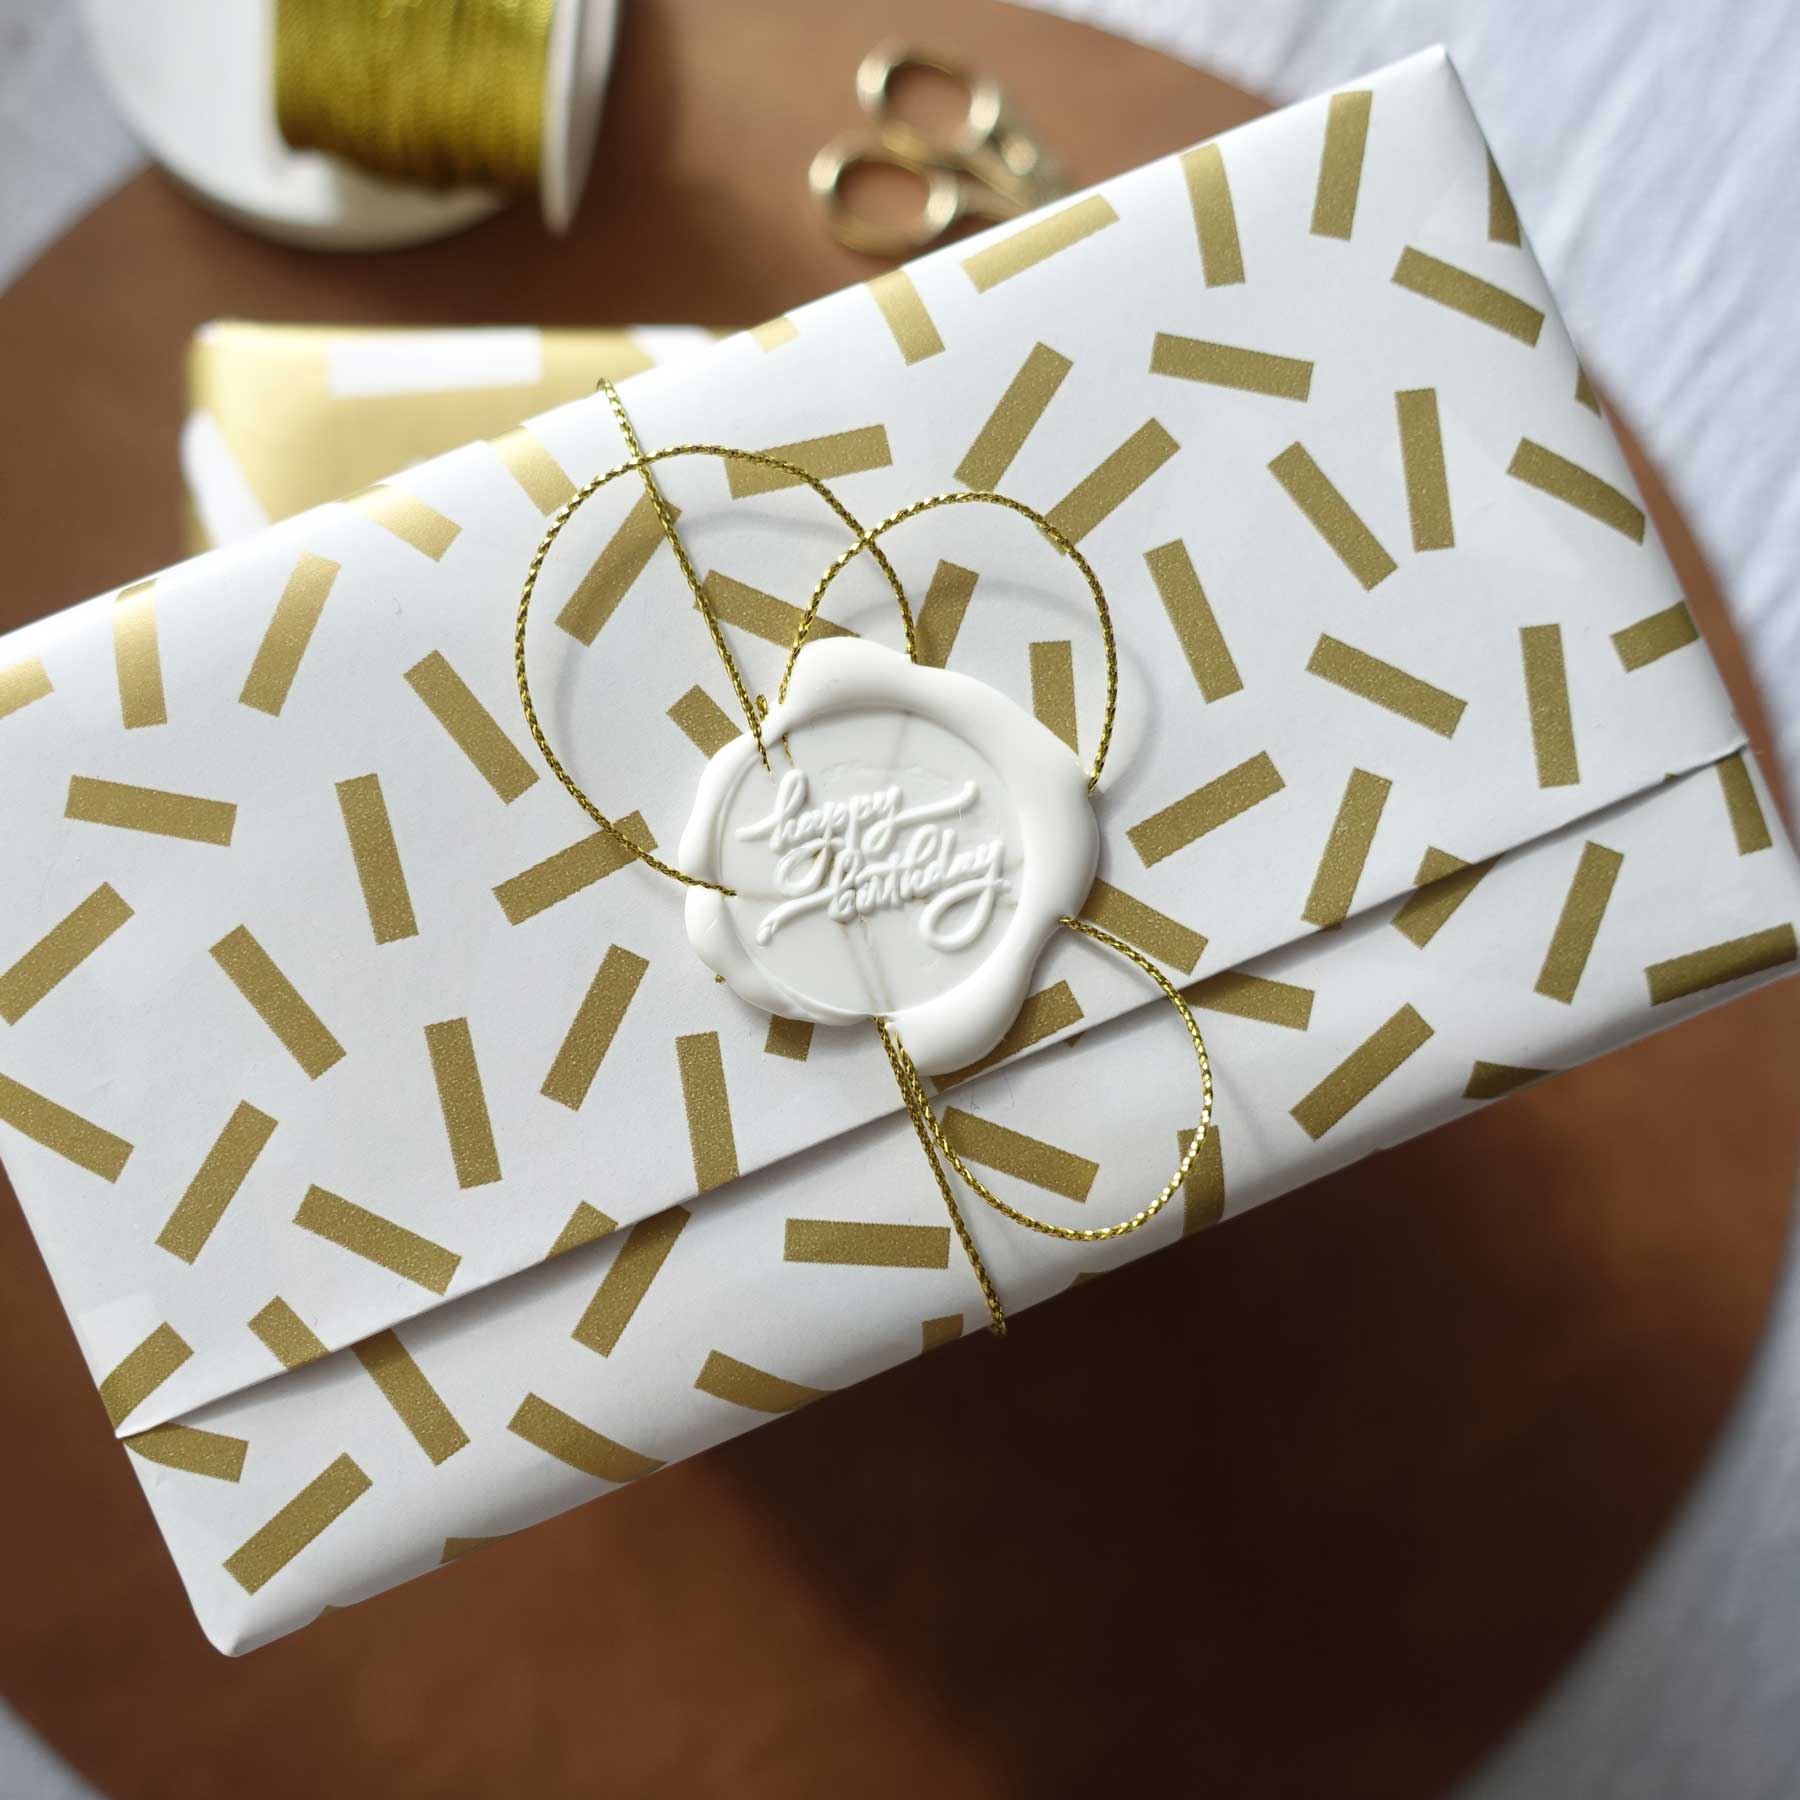 happy birthday white wax seal gift wrapping idea